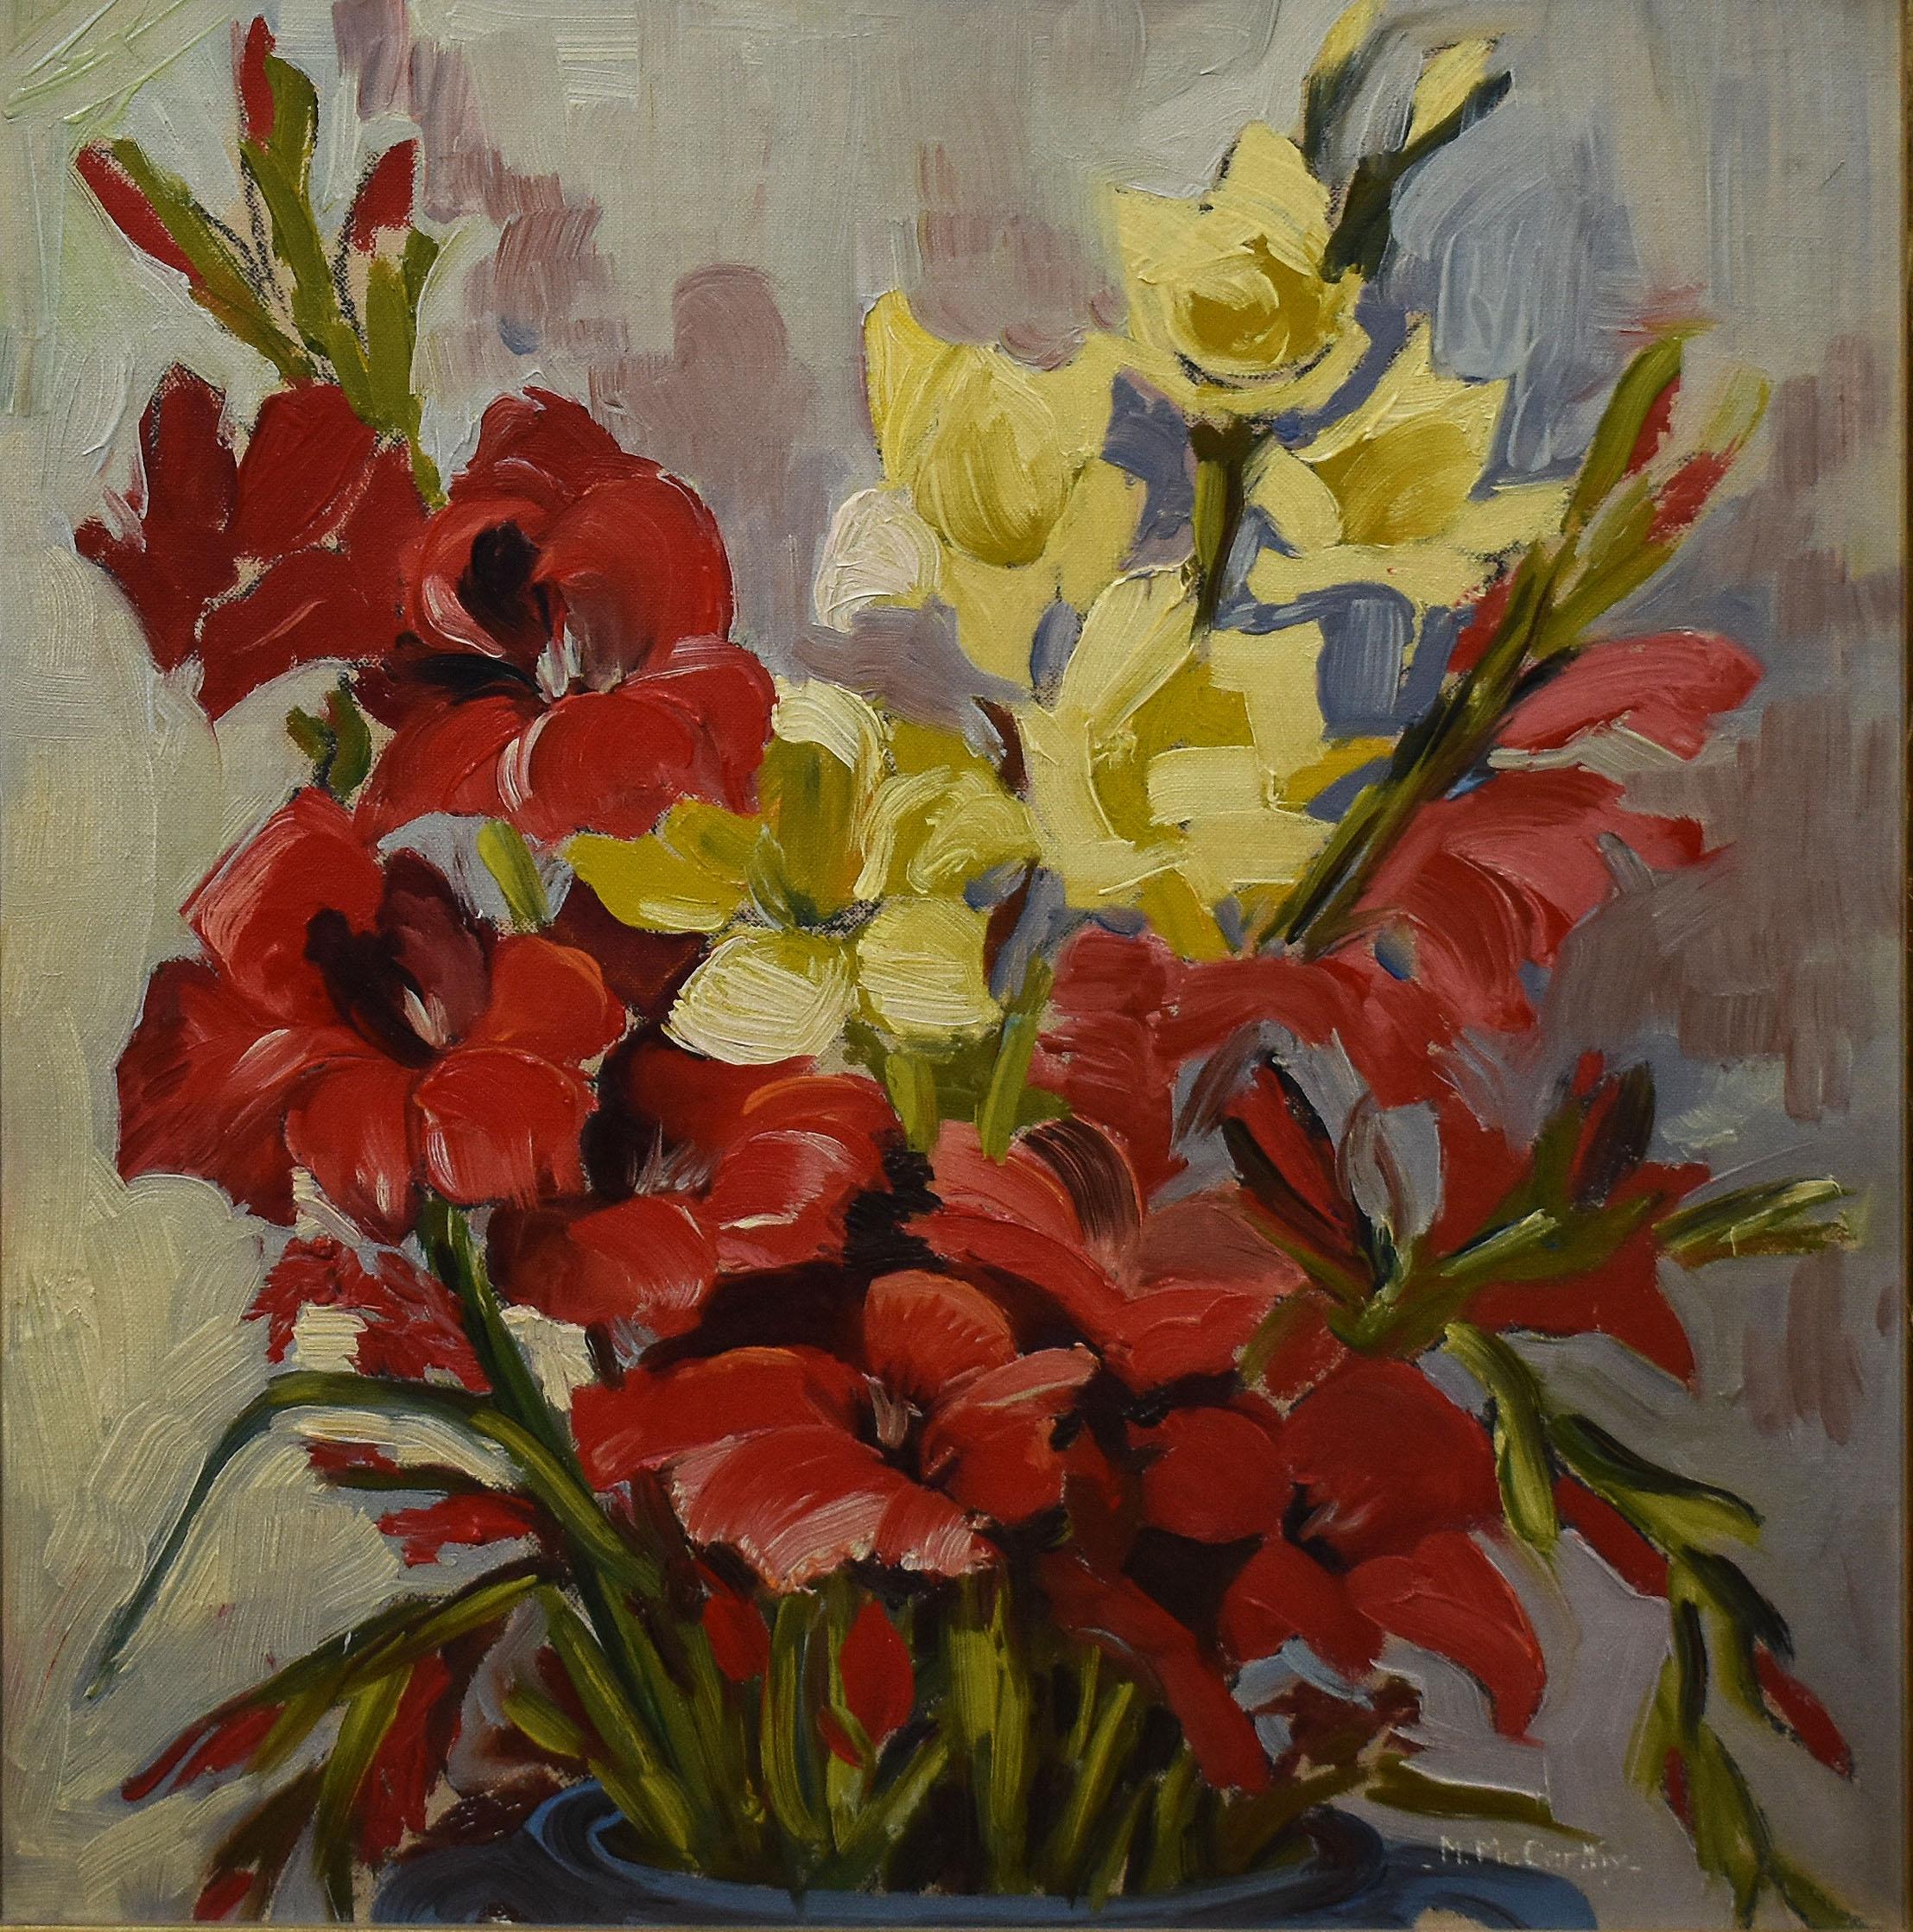 Antique American Impressionist Flower Still Life Signed Oil Painting, Mary Beich - Gray Still-Life Painting by Mary Beich 